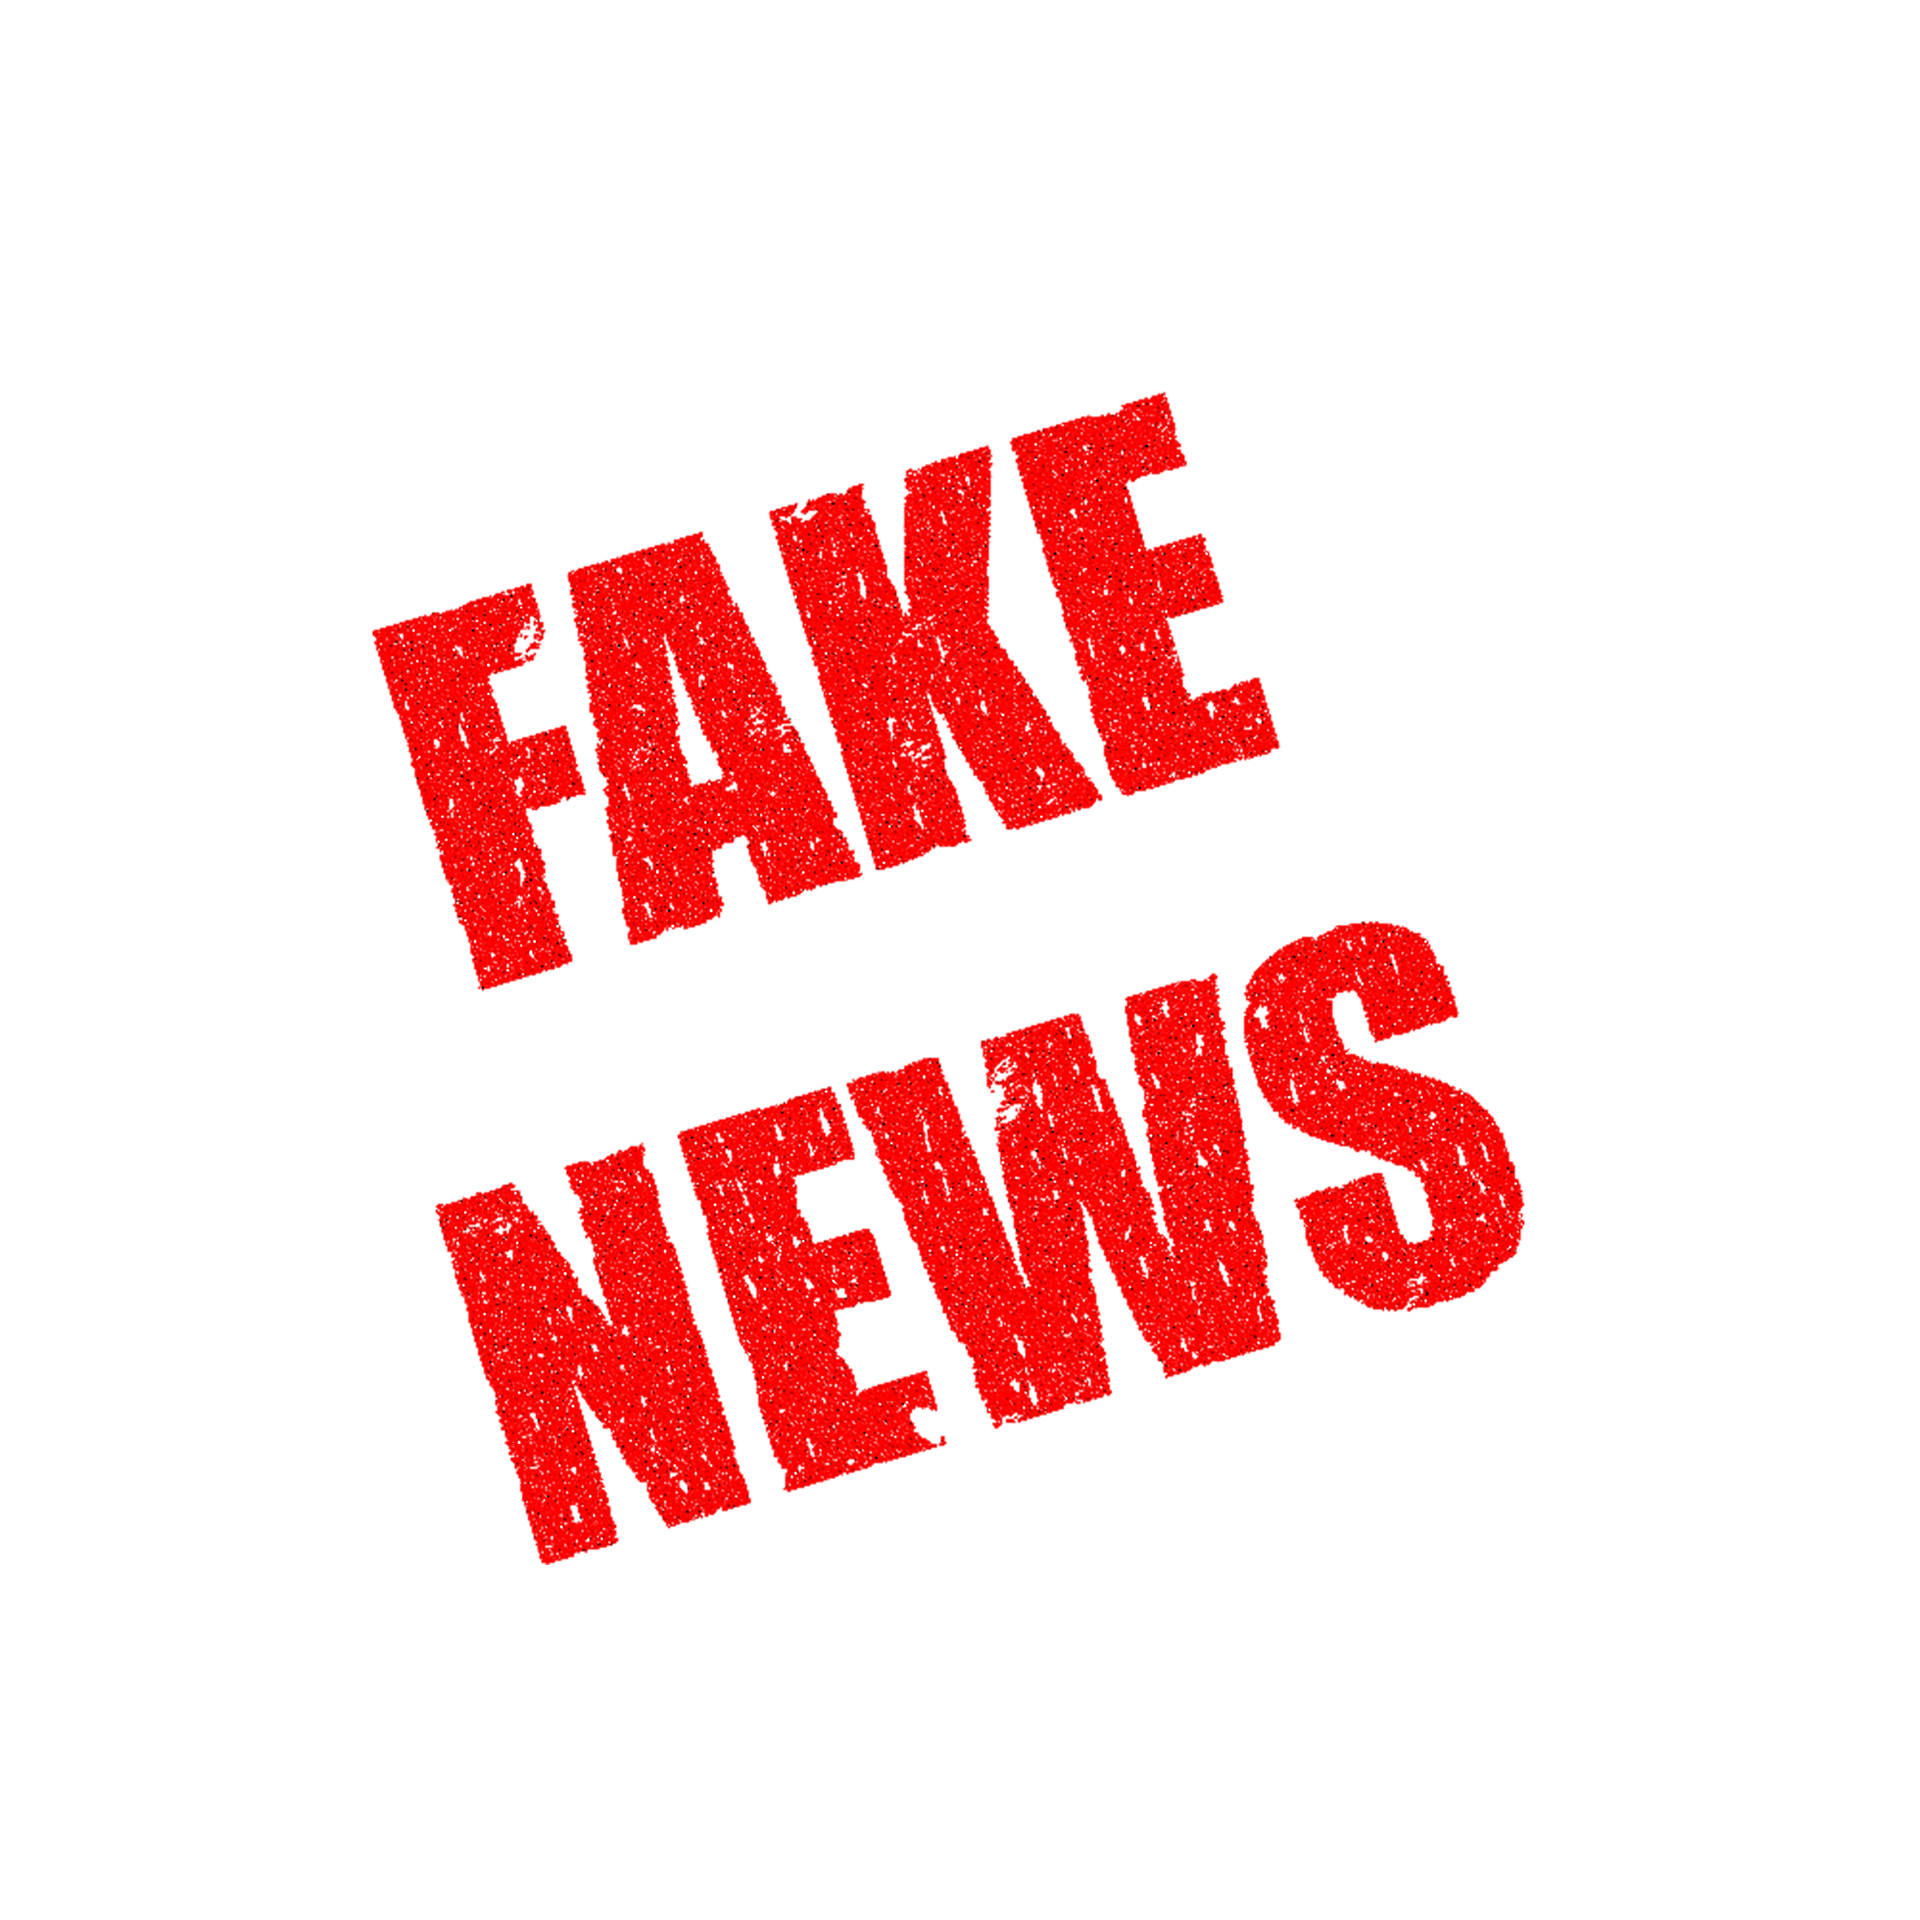 News Brand Media Text Fake PNG Image High Quality PNG Image